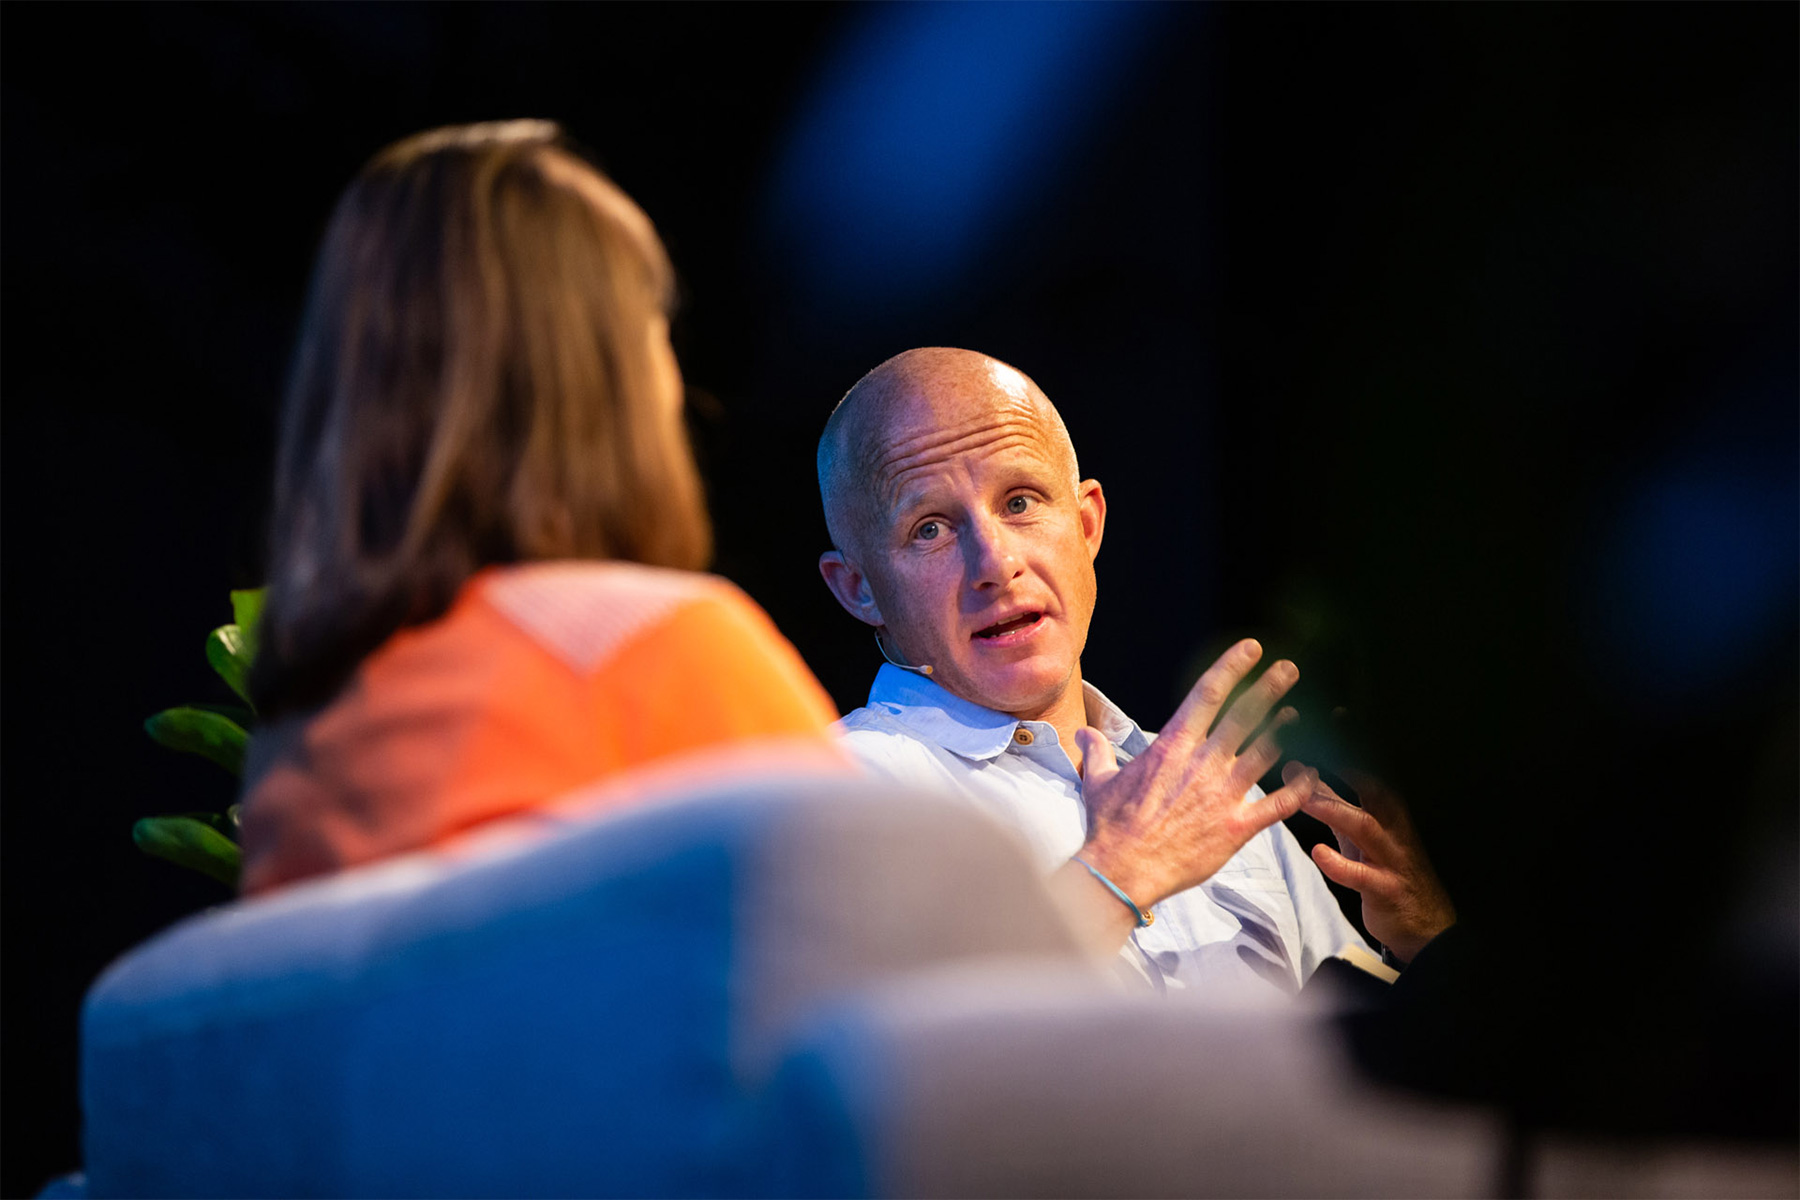 tom kay, founder of finisterre, speaking at the b corp b inspired event in london in october 2019